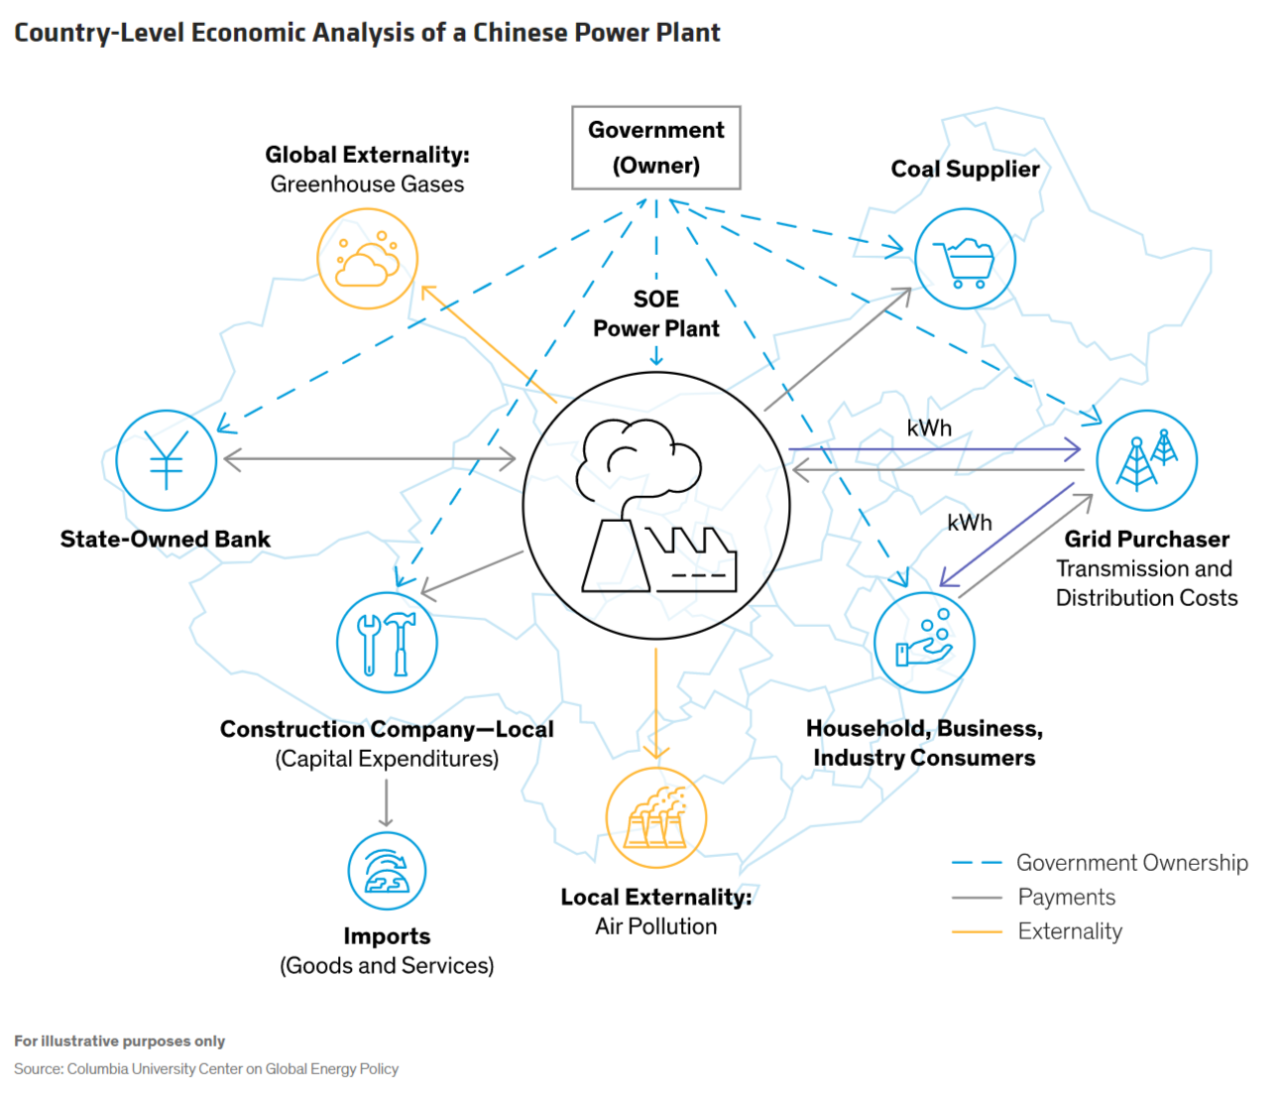 Economic Analysis of a Chinese Power Plant chart